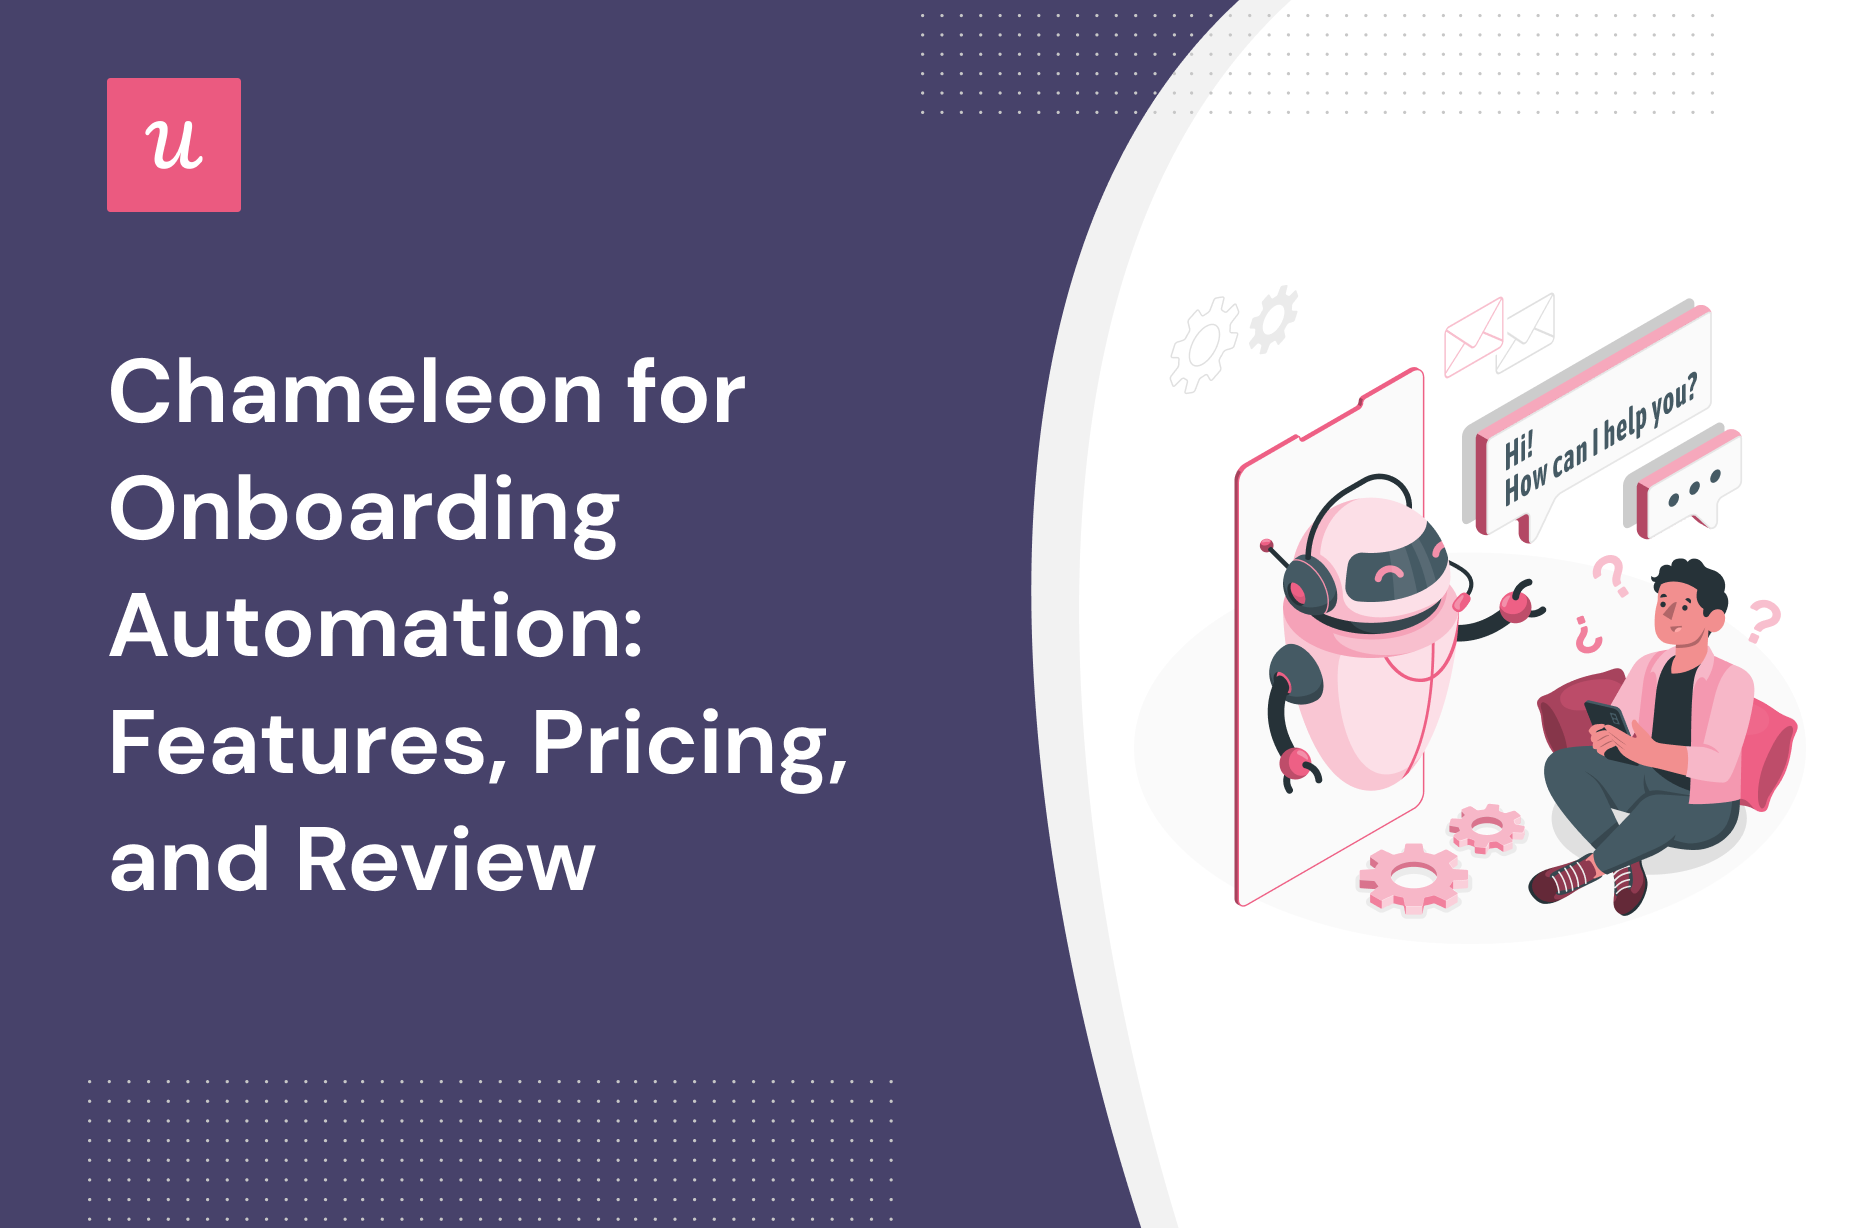 Chameleon for Onboarding Automation: Features, Pricing, and Review